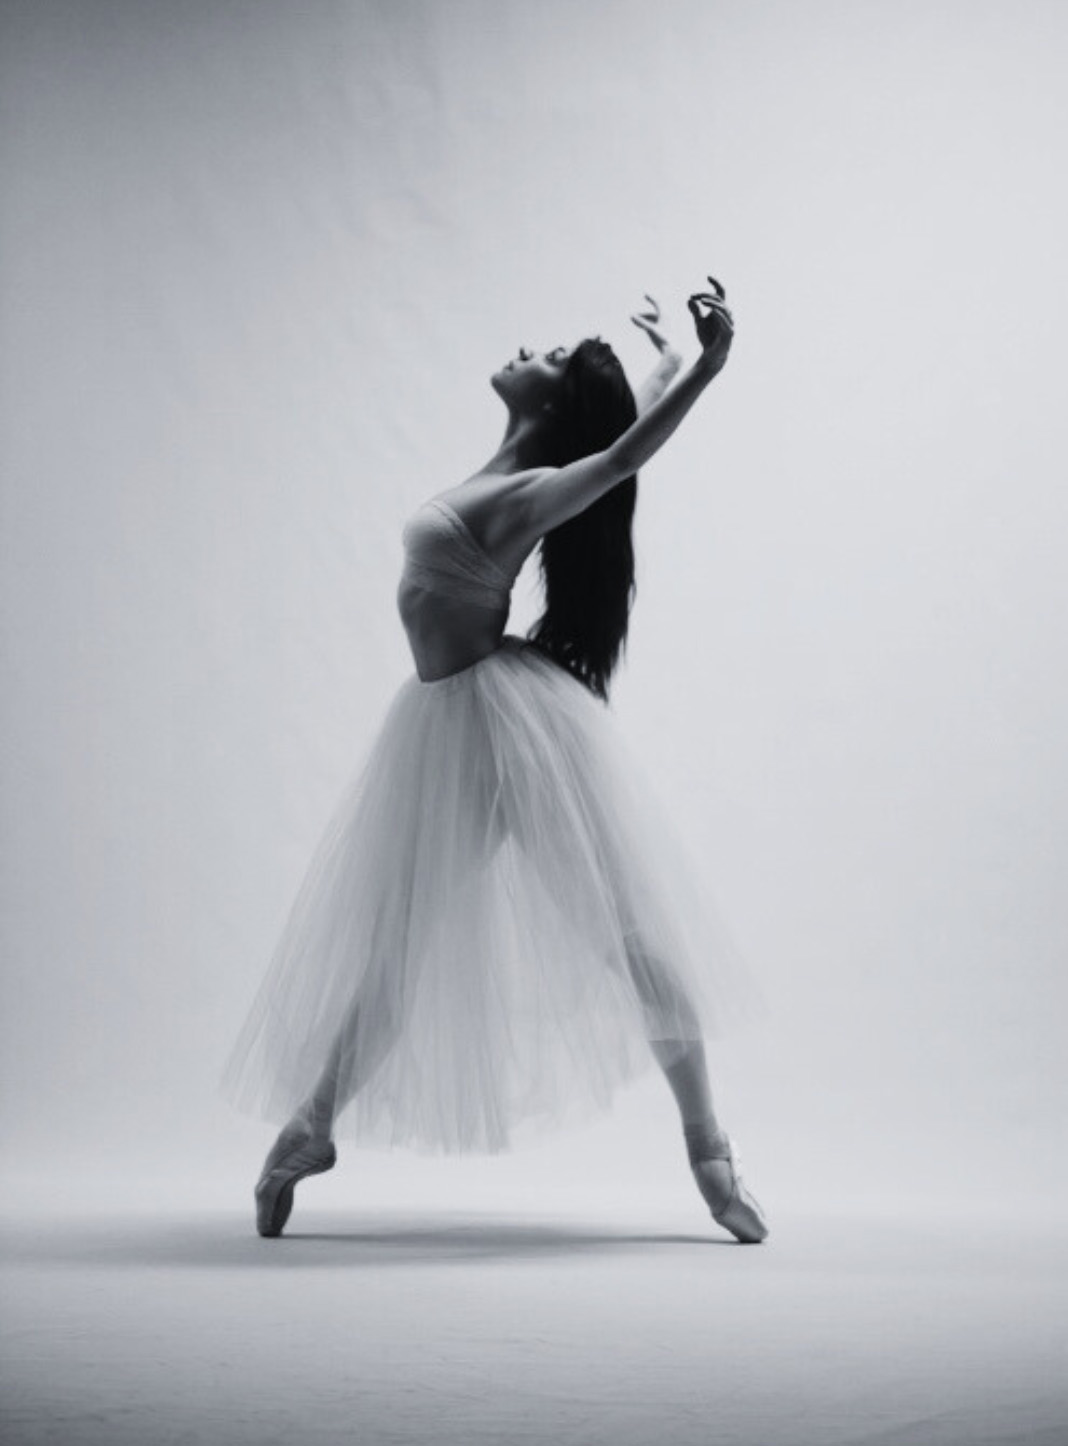 A woman with long dark hair dances in ballet style